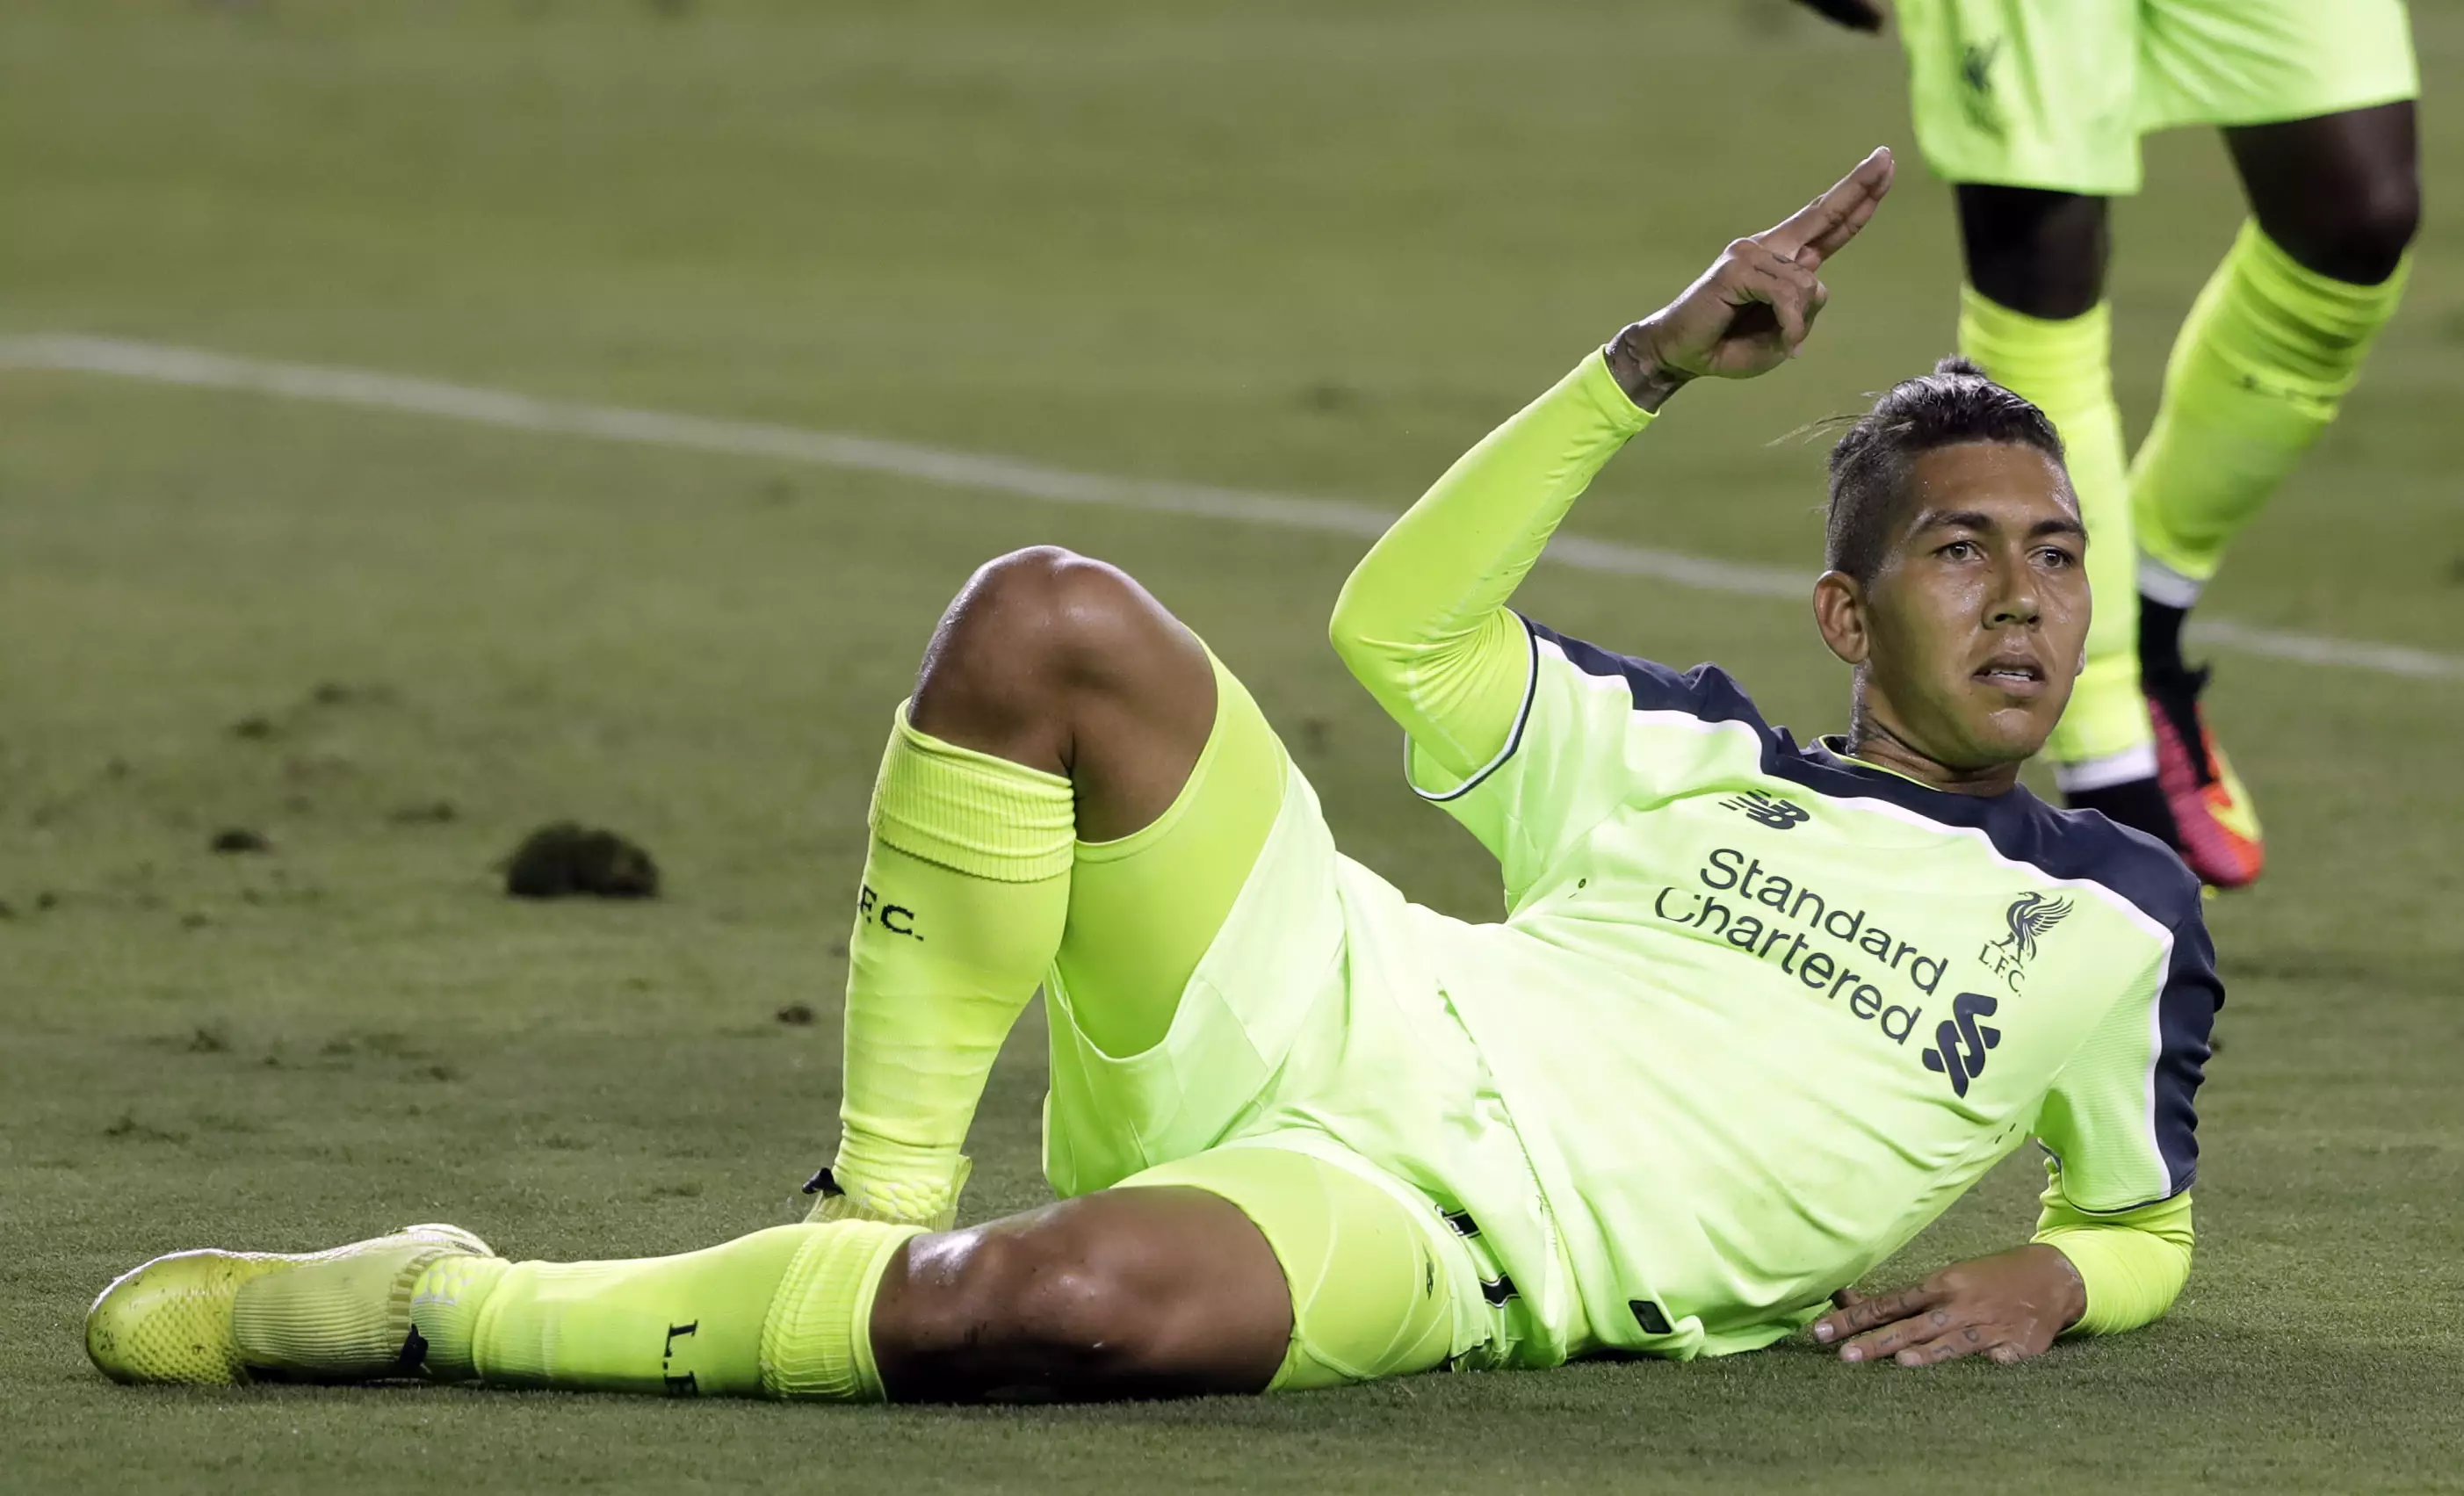 Roberto Firmino Will Reportedly Net Ridiculous Bonus If He Scores Today